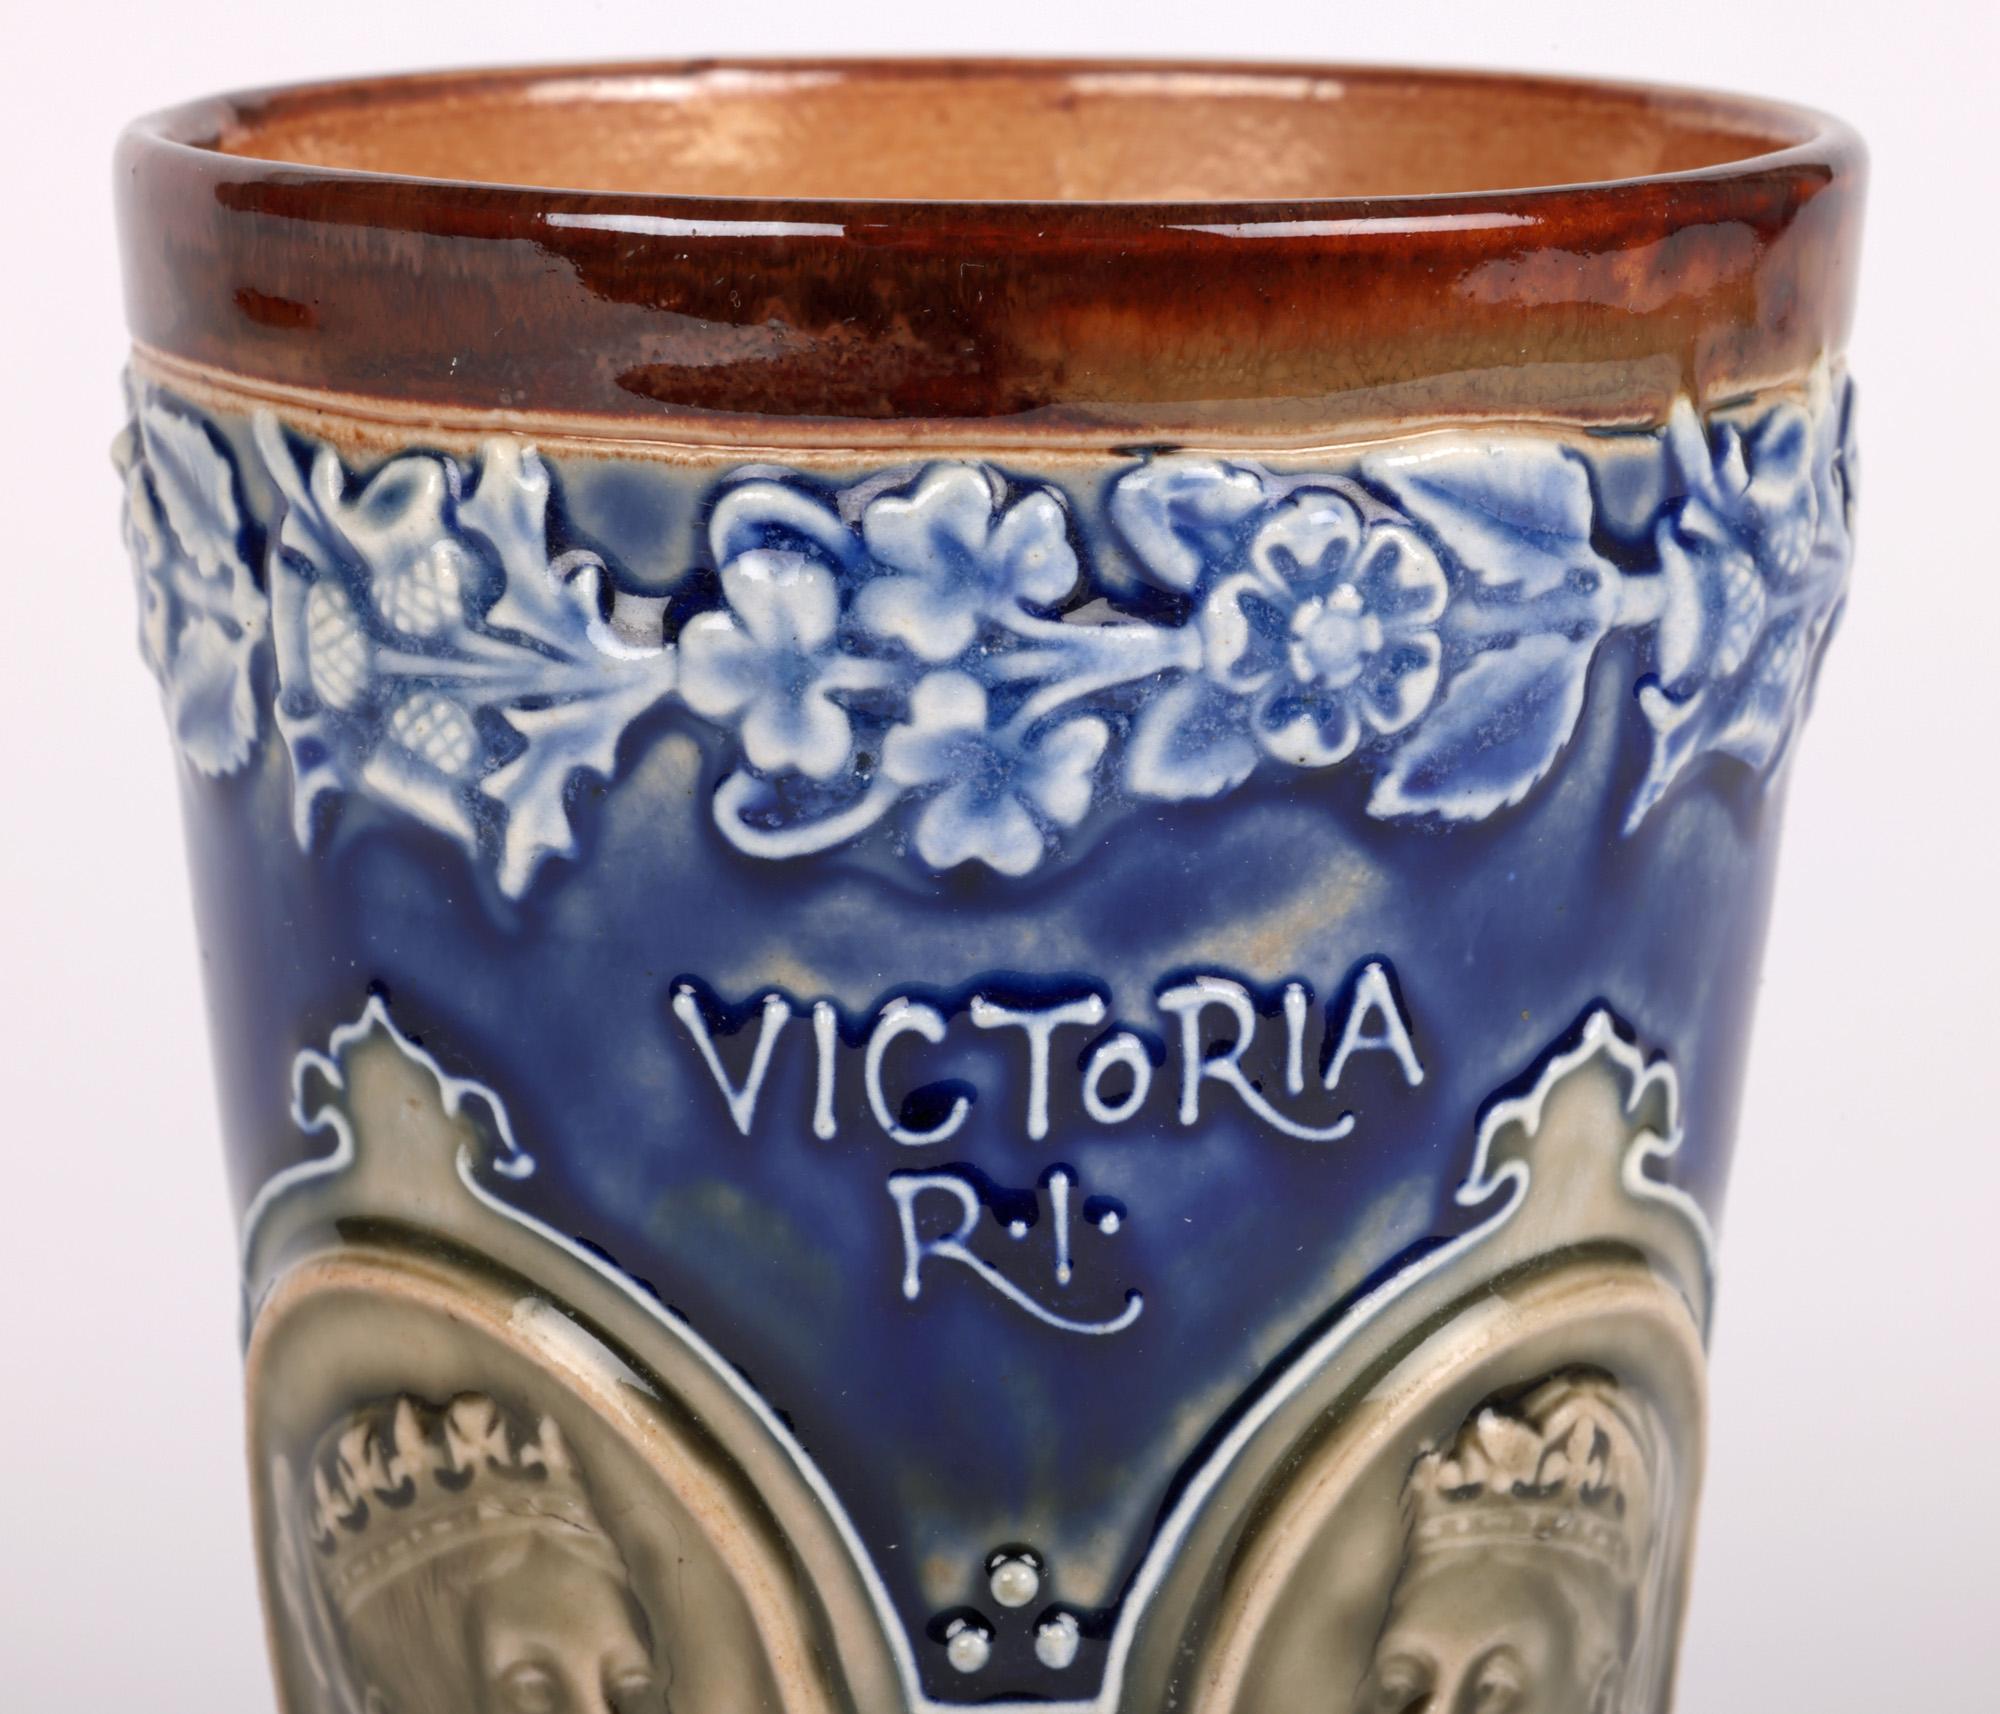 A fine Doulton Lambeth beaker commemorating Queen Victoria’s diamond jubilee by renowned artists Elizabeth Atkins and Eleanor Tosen and dating from 1897. The stoneware beaker is of simple funnel shape standing on a narrow flat round base with the